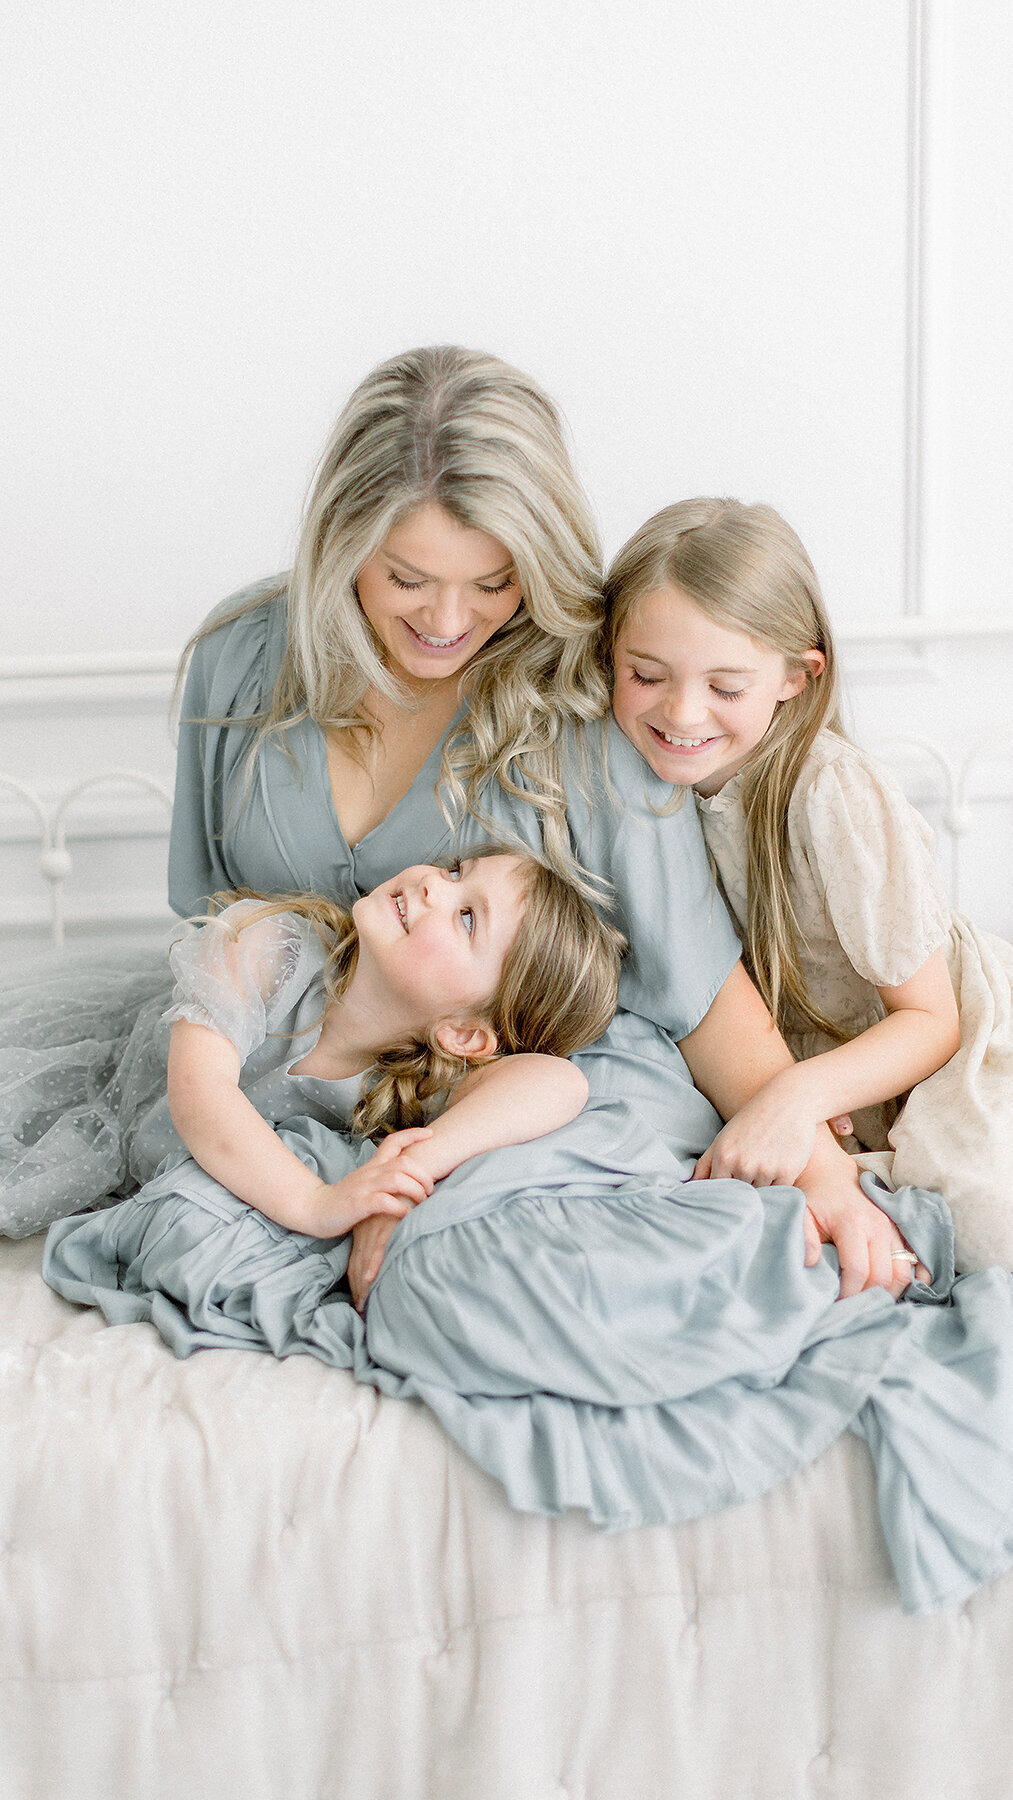 A mother and her two girls in a photography studio cuddling each other while they are sitting on a bed for their family photos together.